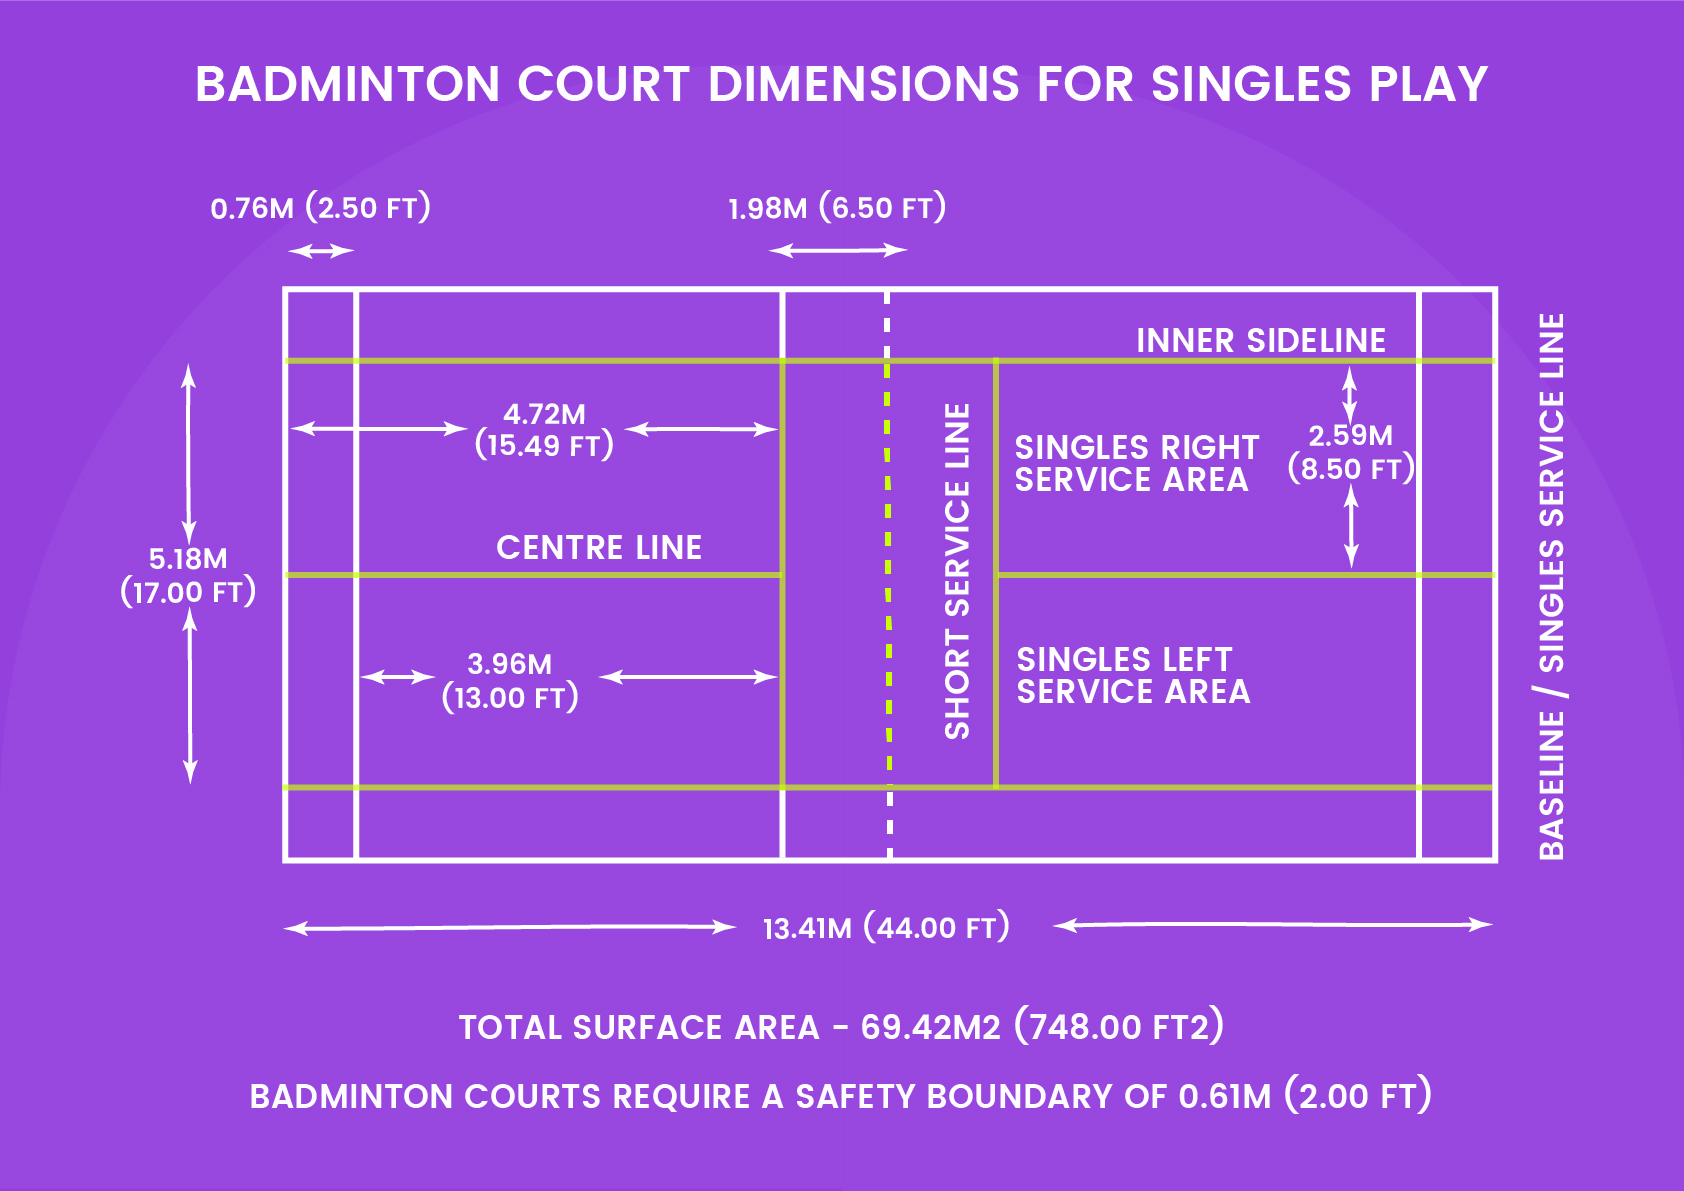 Badminton Court Dimensions for Singles Play